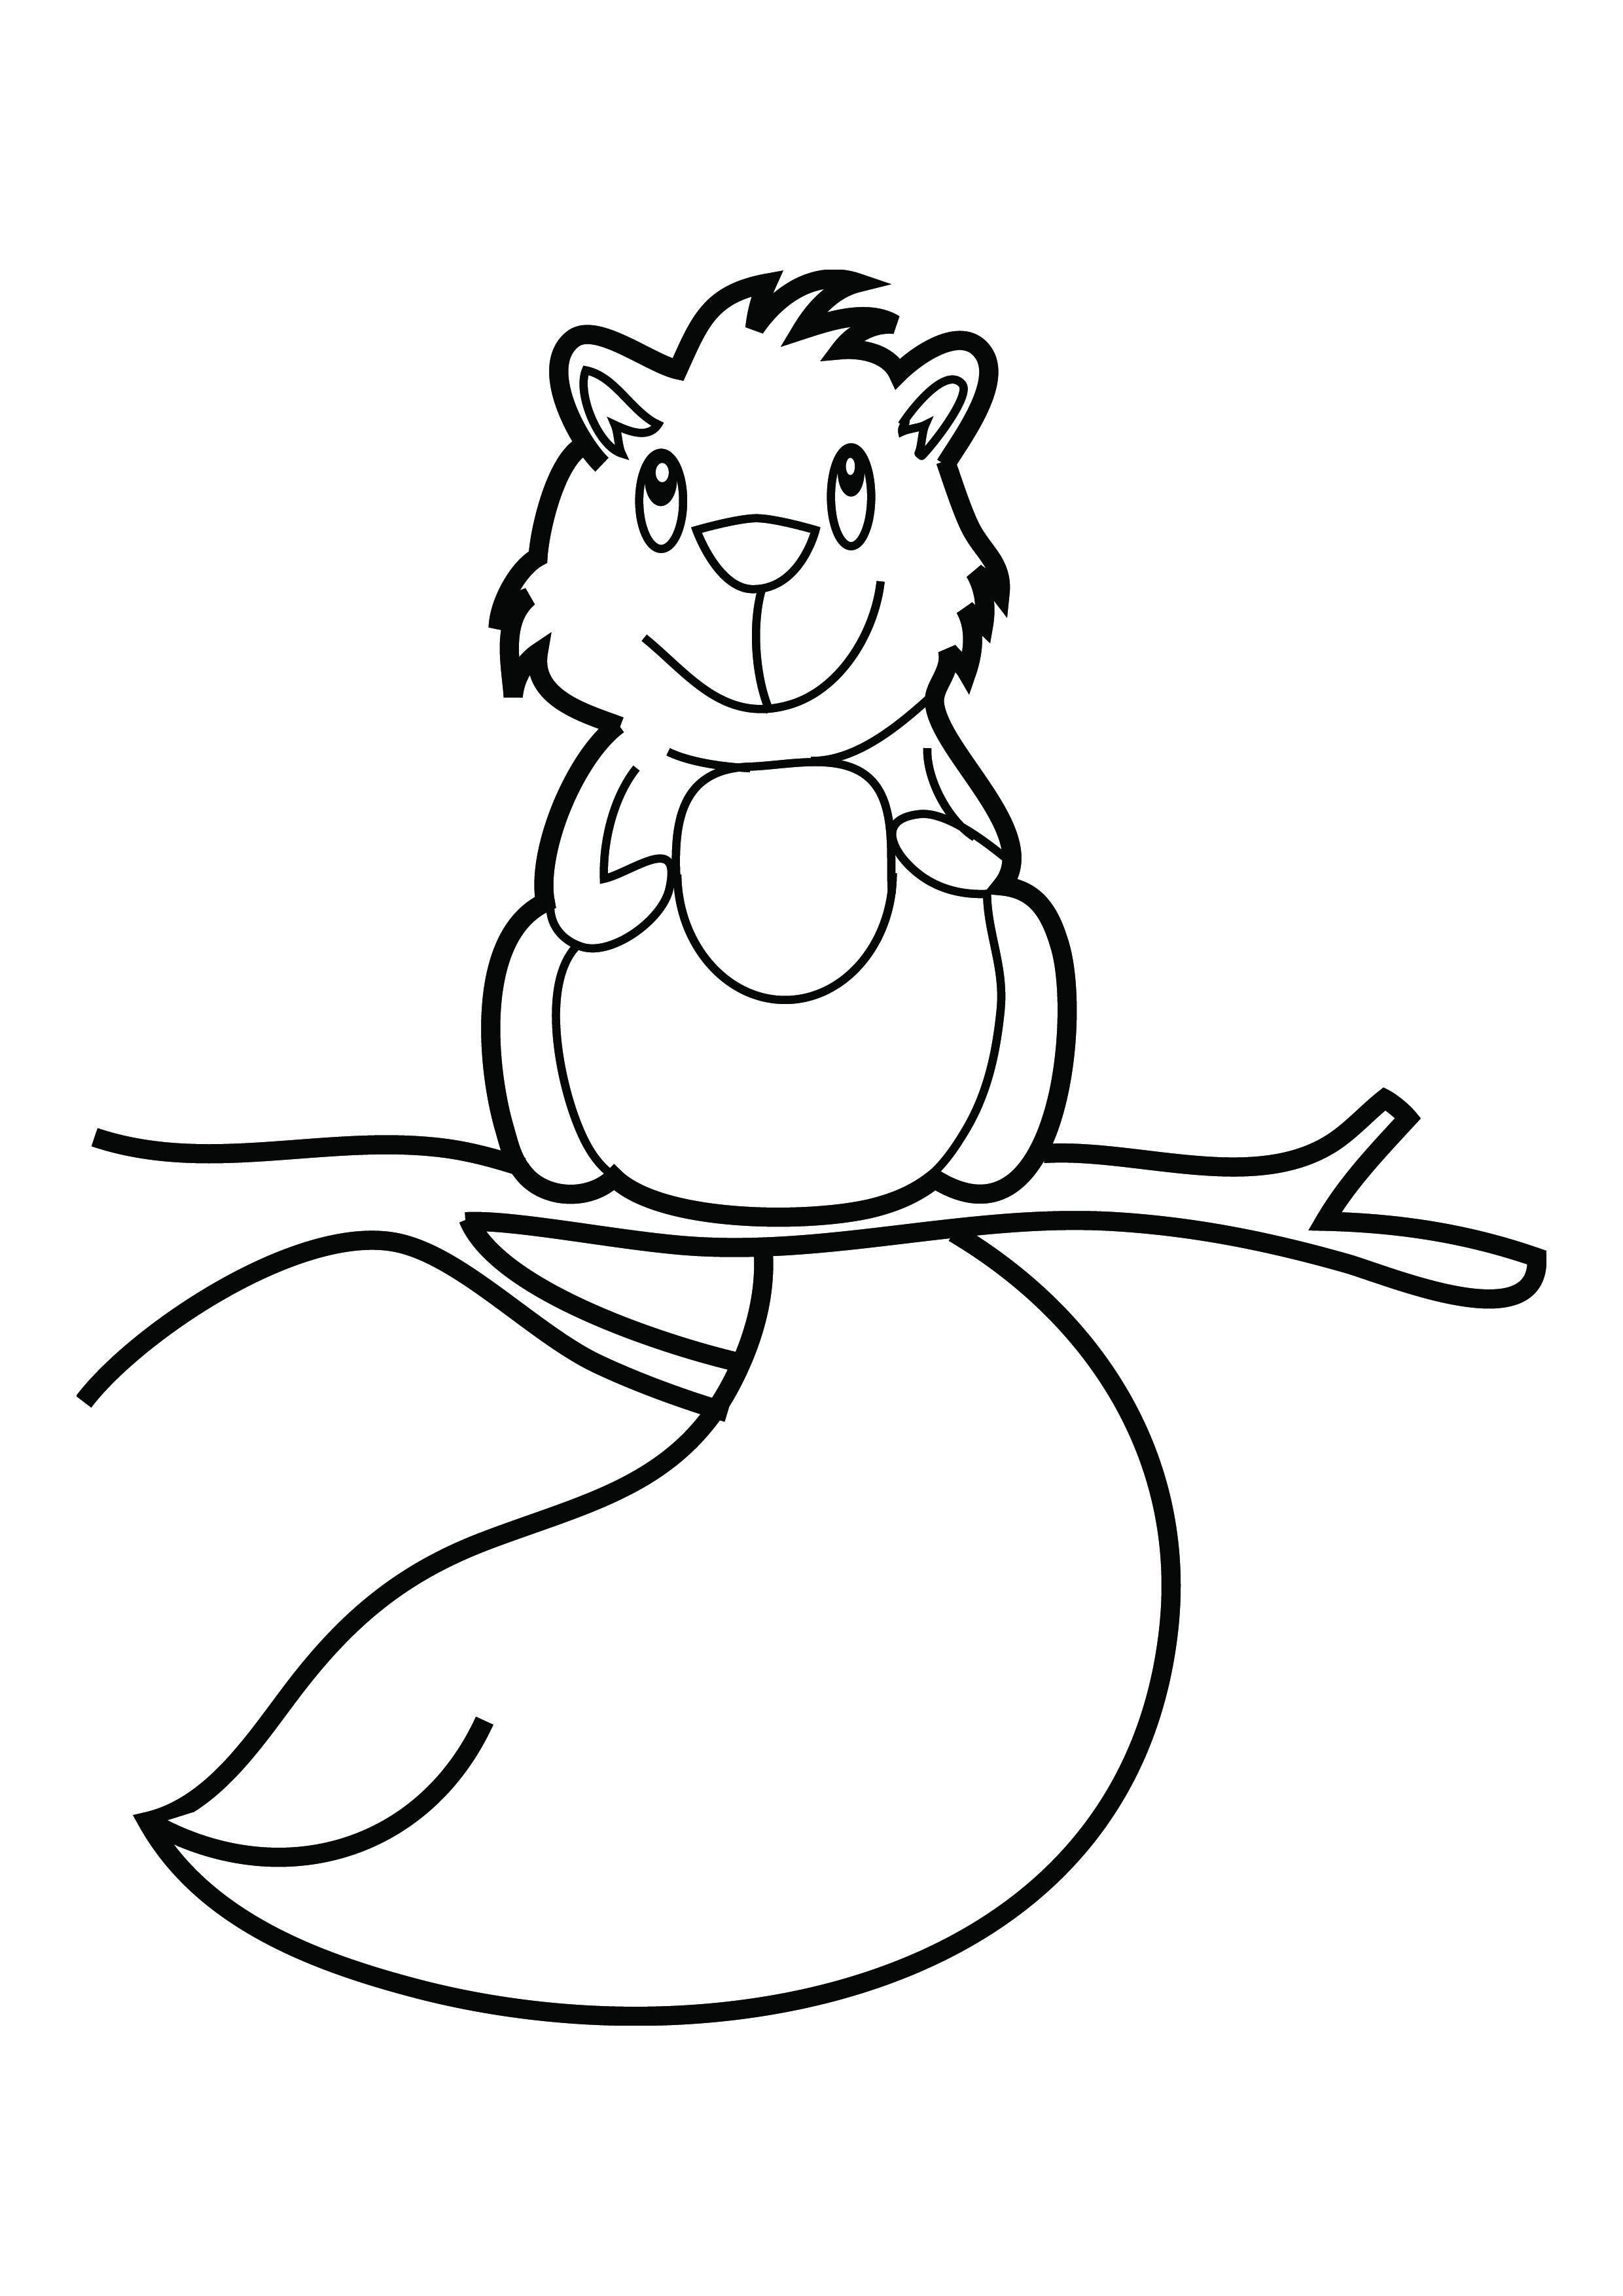 Free Printable Squirrel Coloring Pages For Kids - Animal Place